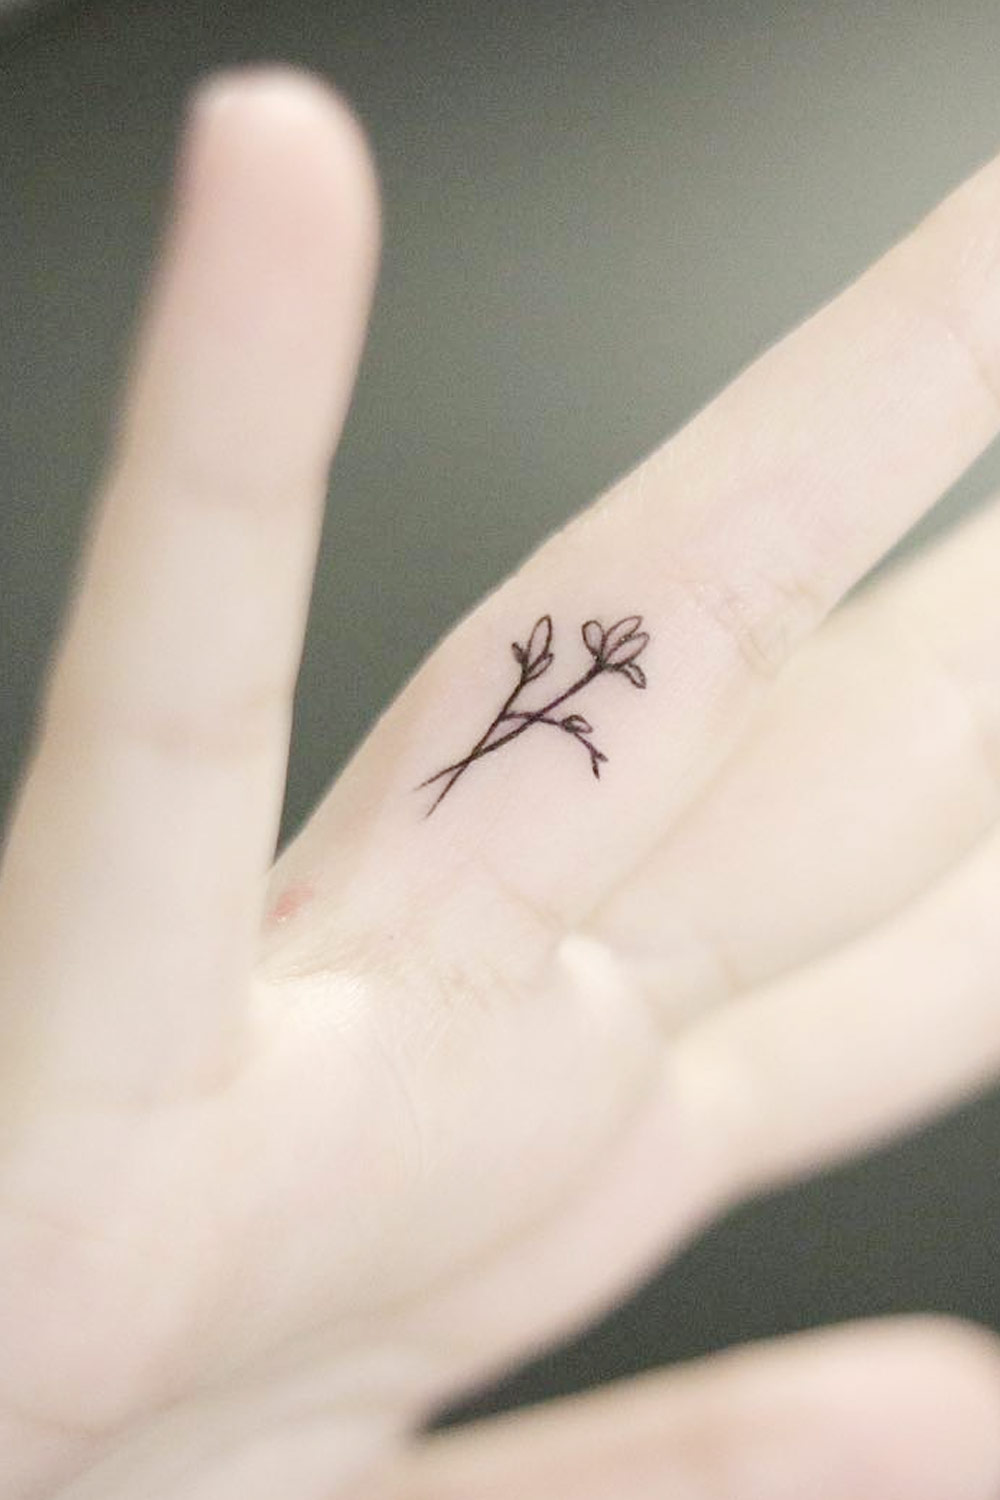 50 Eye-Catching Finger Tattoos That Women Just Can't Say No To - TattooBlend